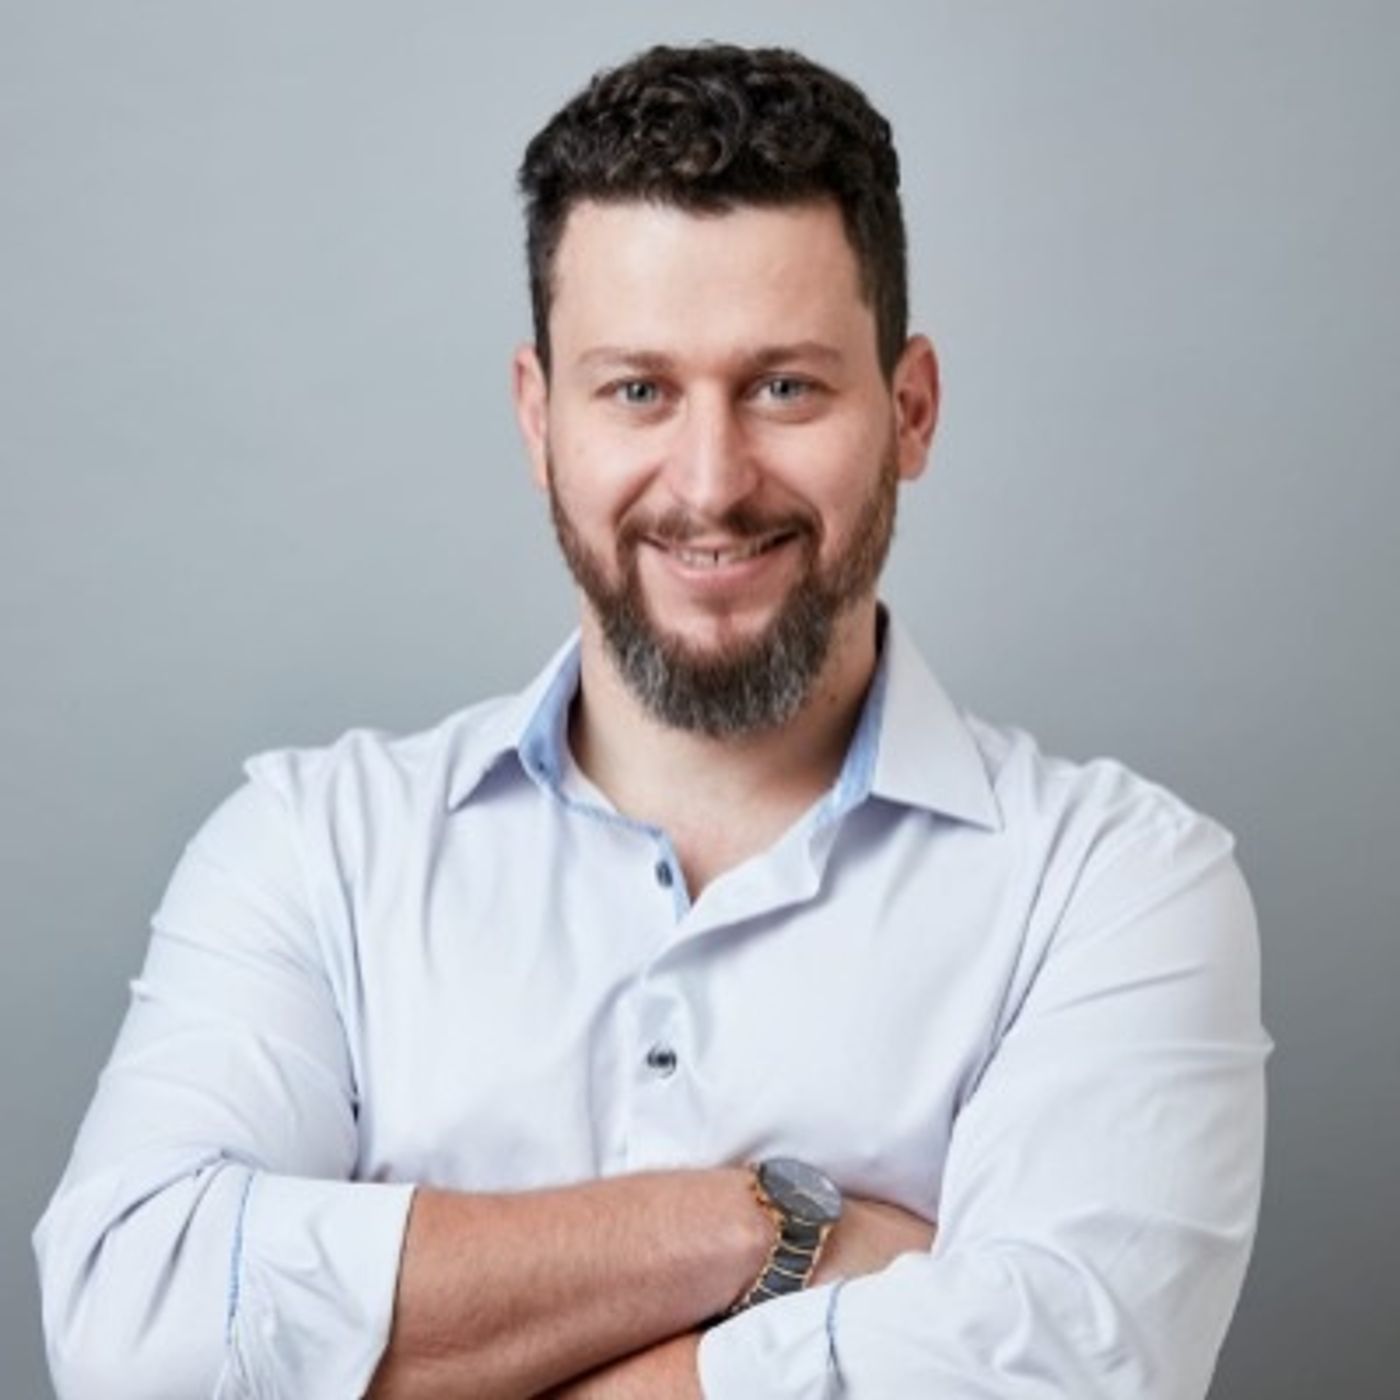 Interview with Stas Grinberg, Co-Founder of Vision & Beyond